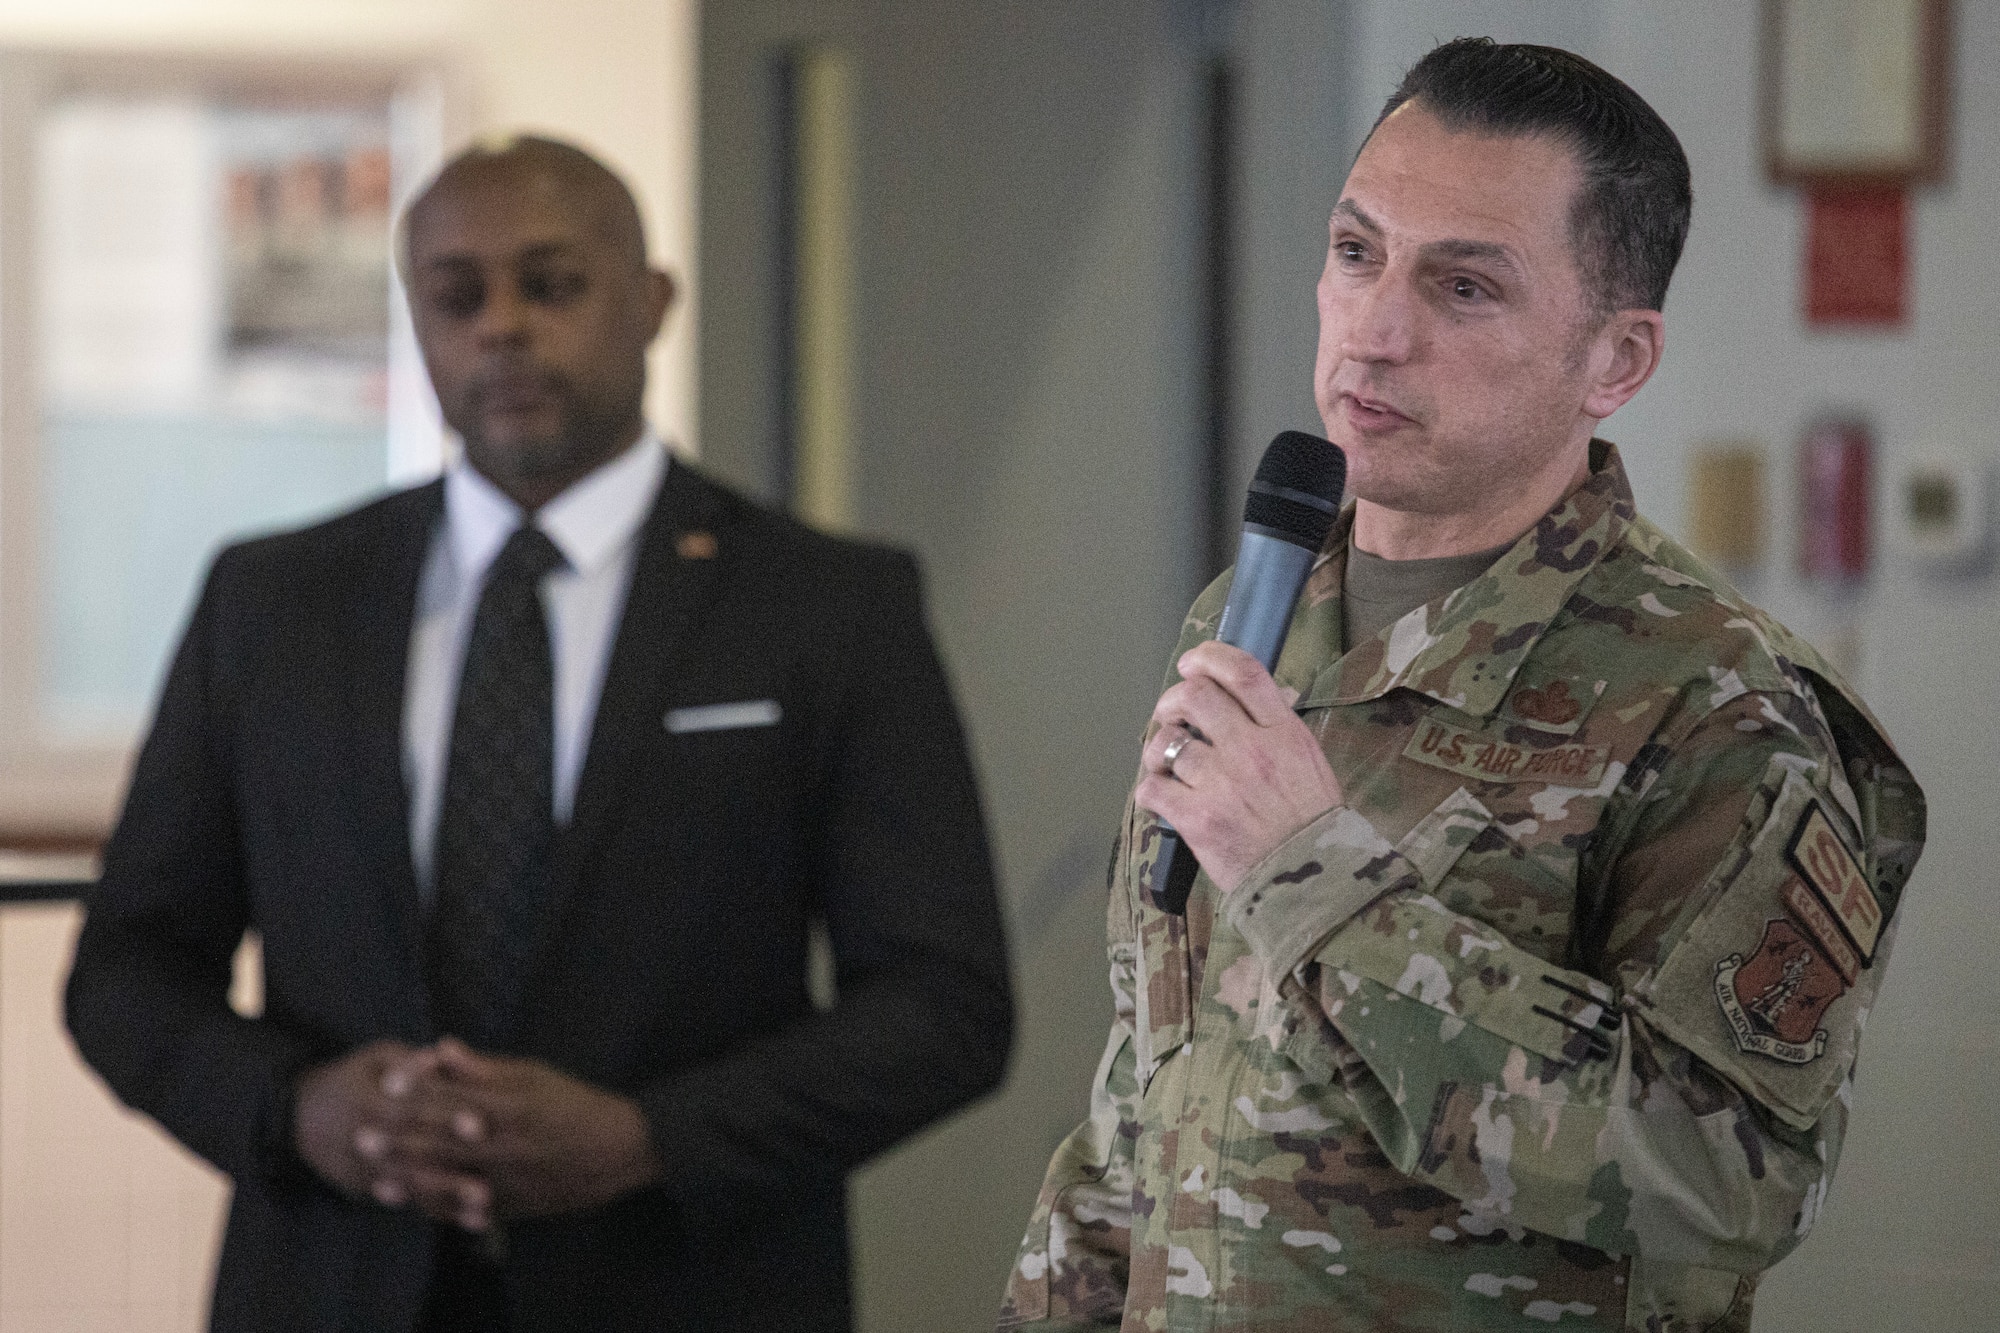 New Jersey State Command Chief Master Sgt. Michael Rakauckas introduces guest speaker Corey Jones during the 5th Annual O-6/E-9 Summit held at the 177th Fighter Wing on Atlantic City Air National Guard Base, New Jersey, June 7, 2023.